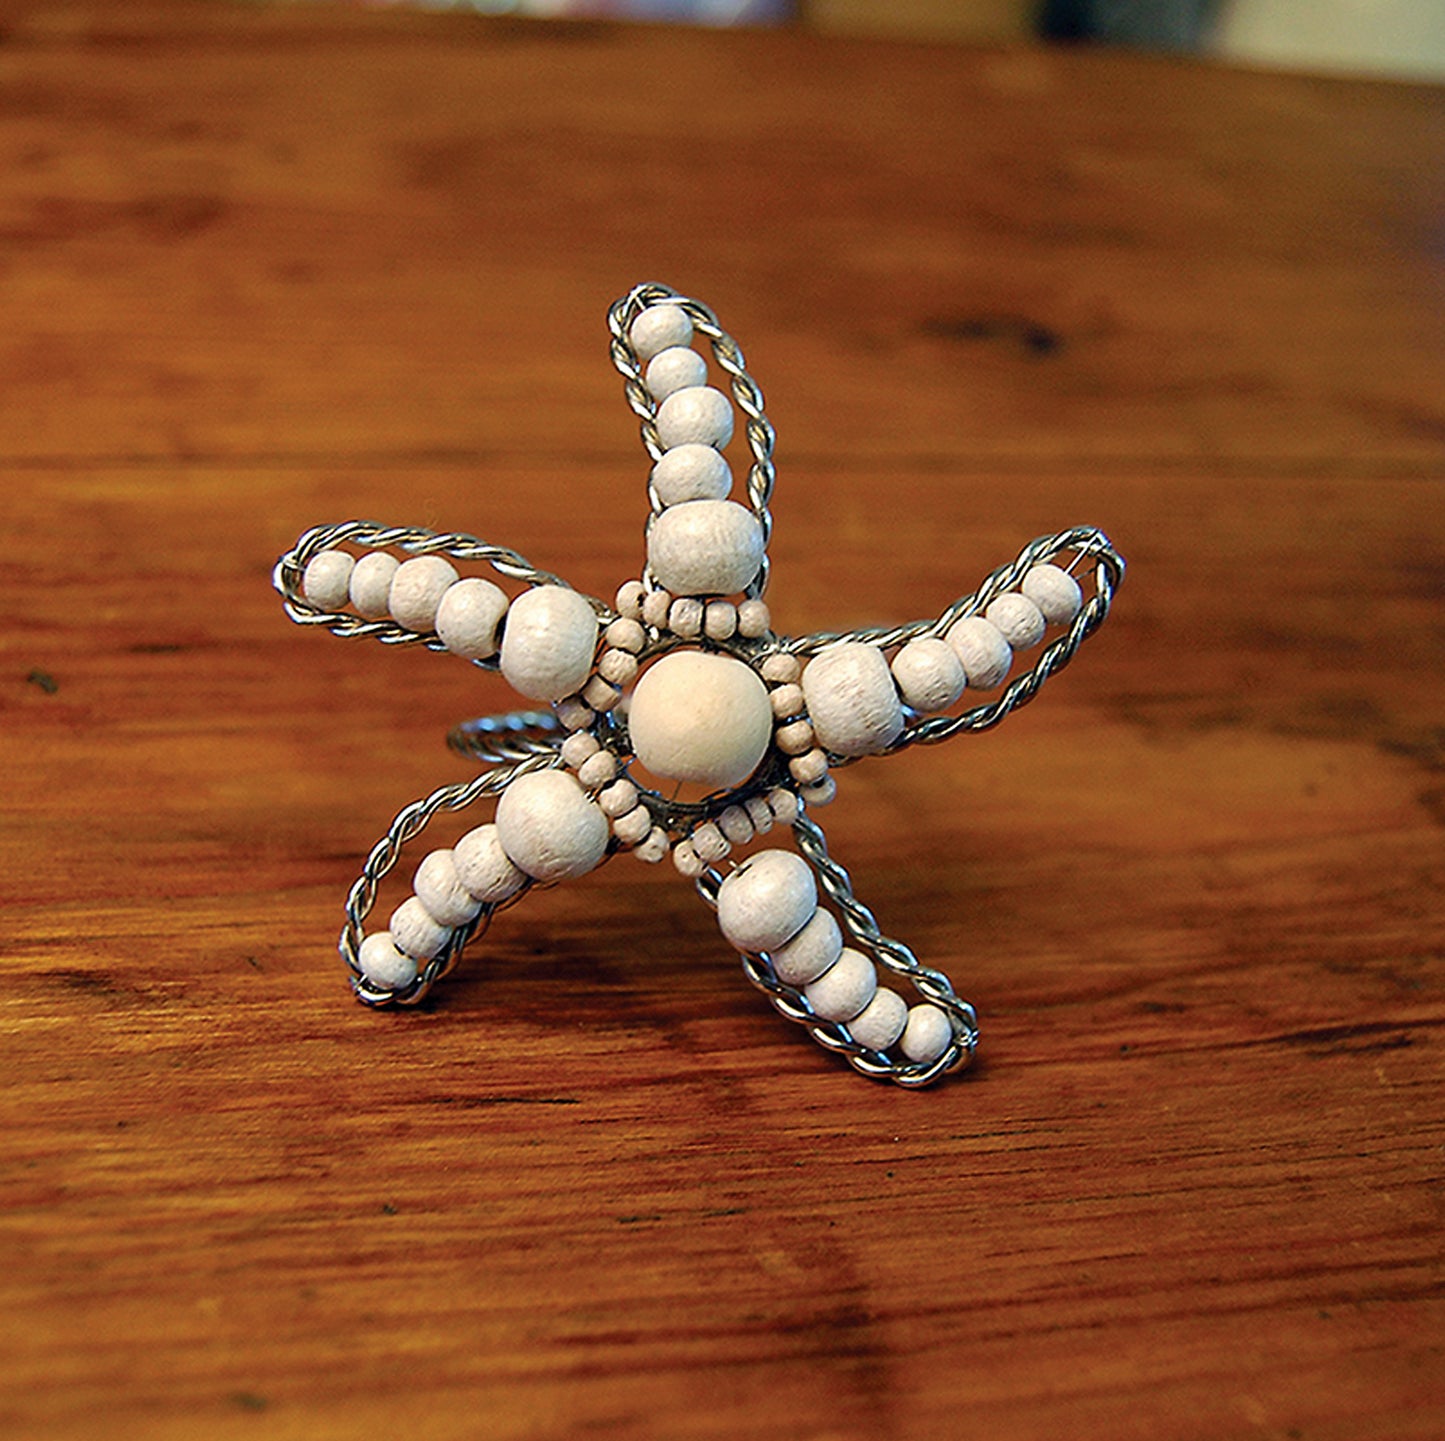 Sea star shaped napkin ring crafted of natural beads.